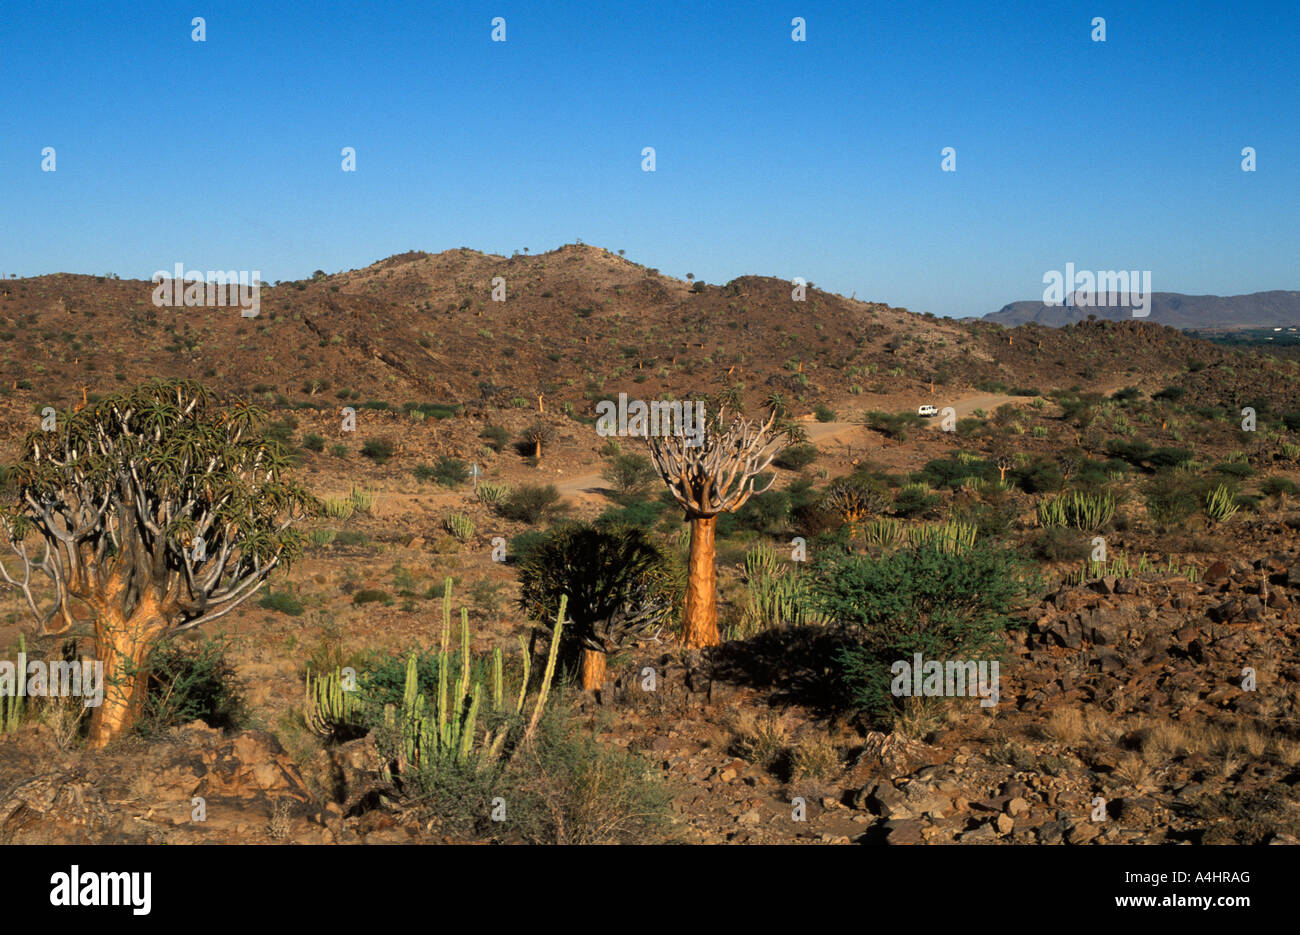 Dry scenery with kokerbooms near Kakamas Northern Cape South Africa Stock Photo